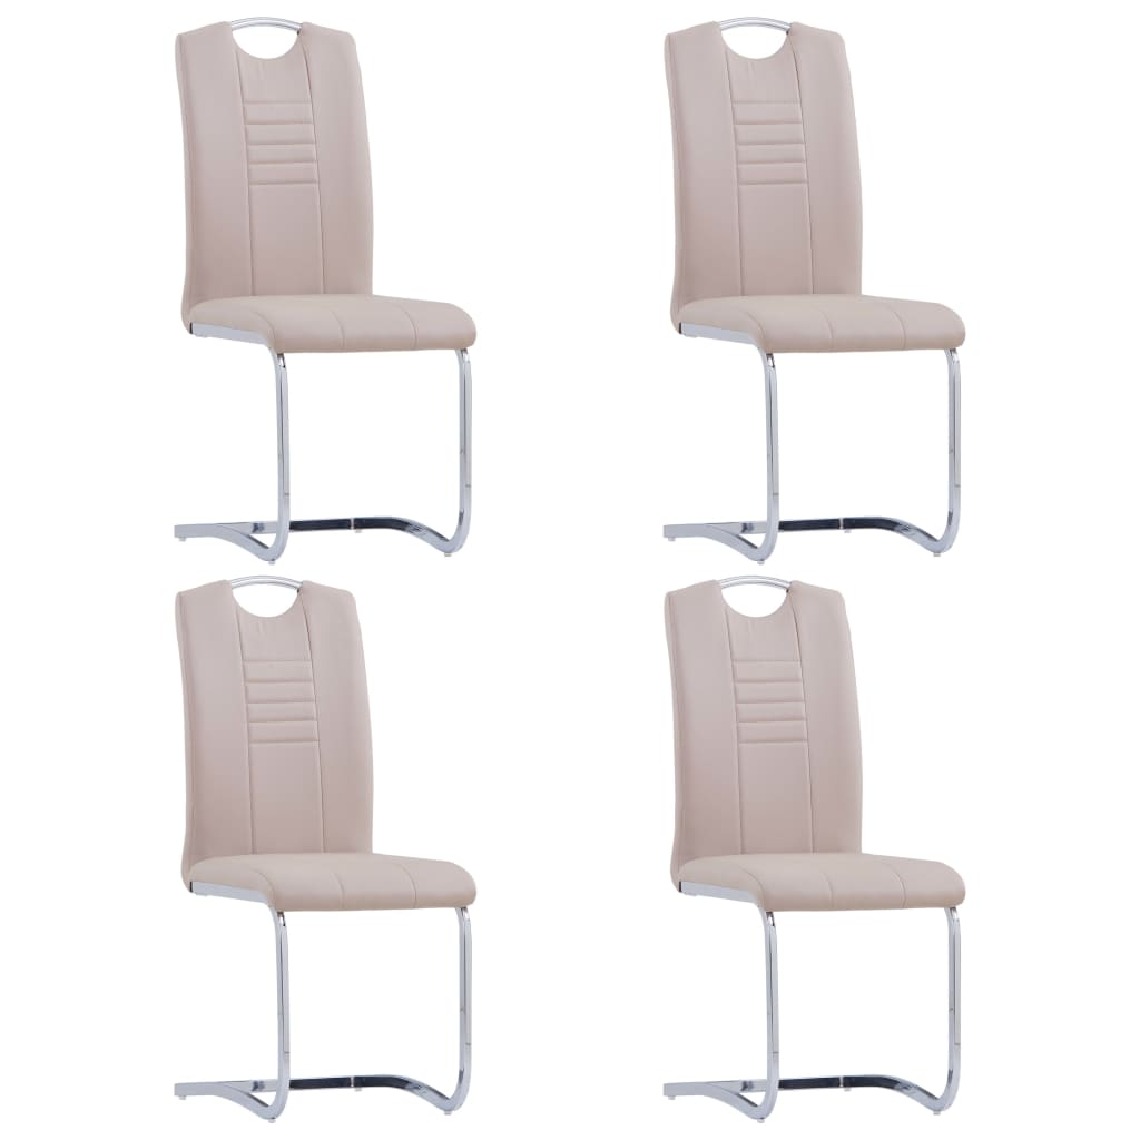 Chunhelife - Chunhelife Chaises de salle à manger cantilever 4pcs Cappuccino Similicuir - Chaises